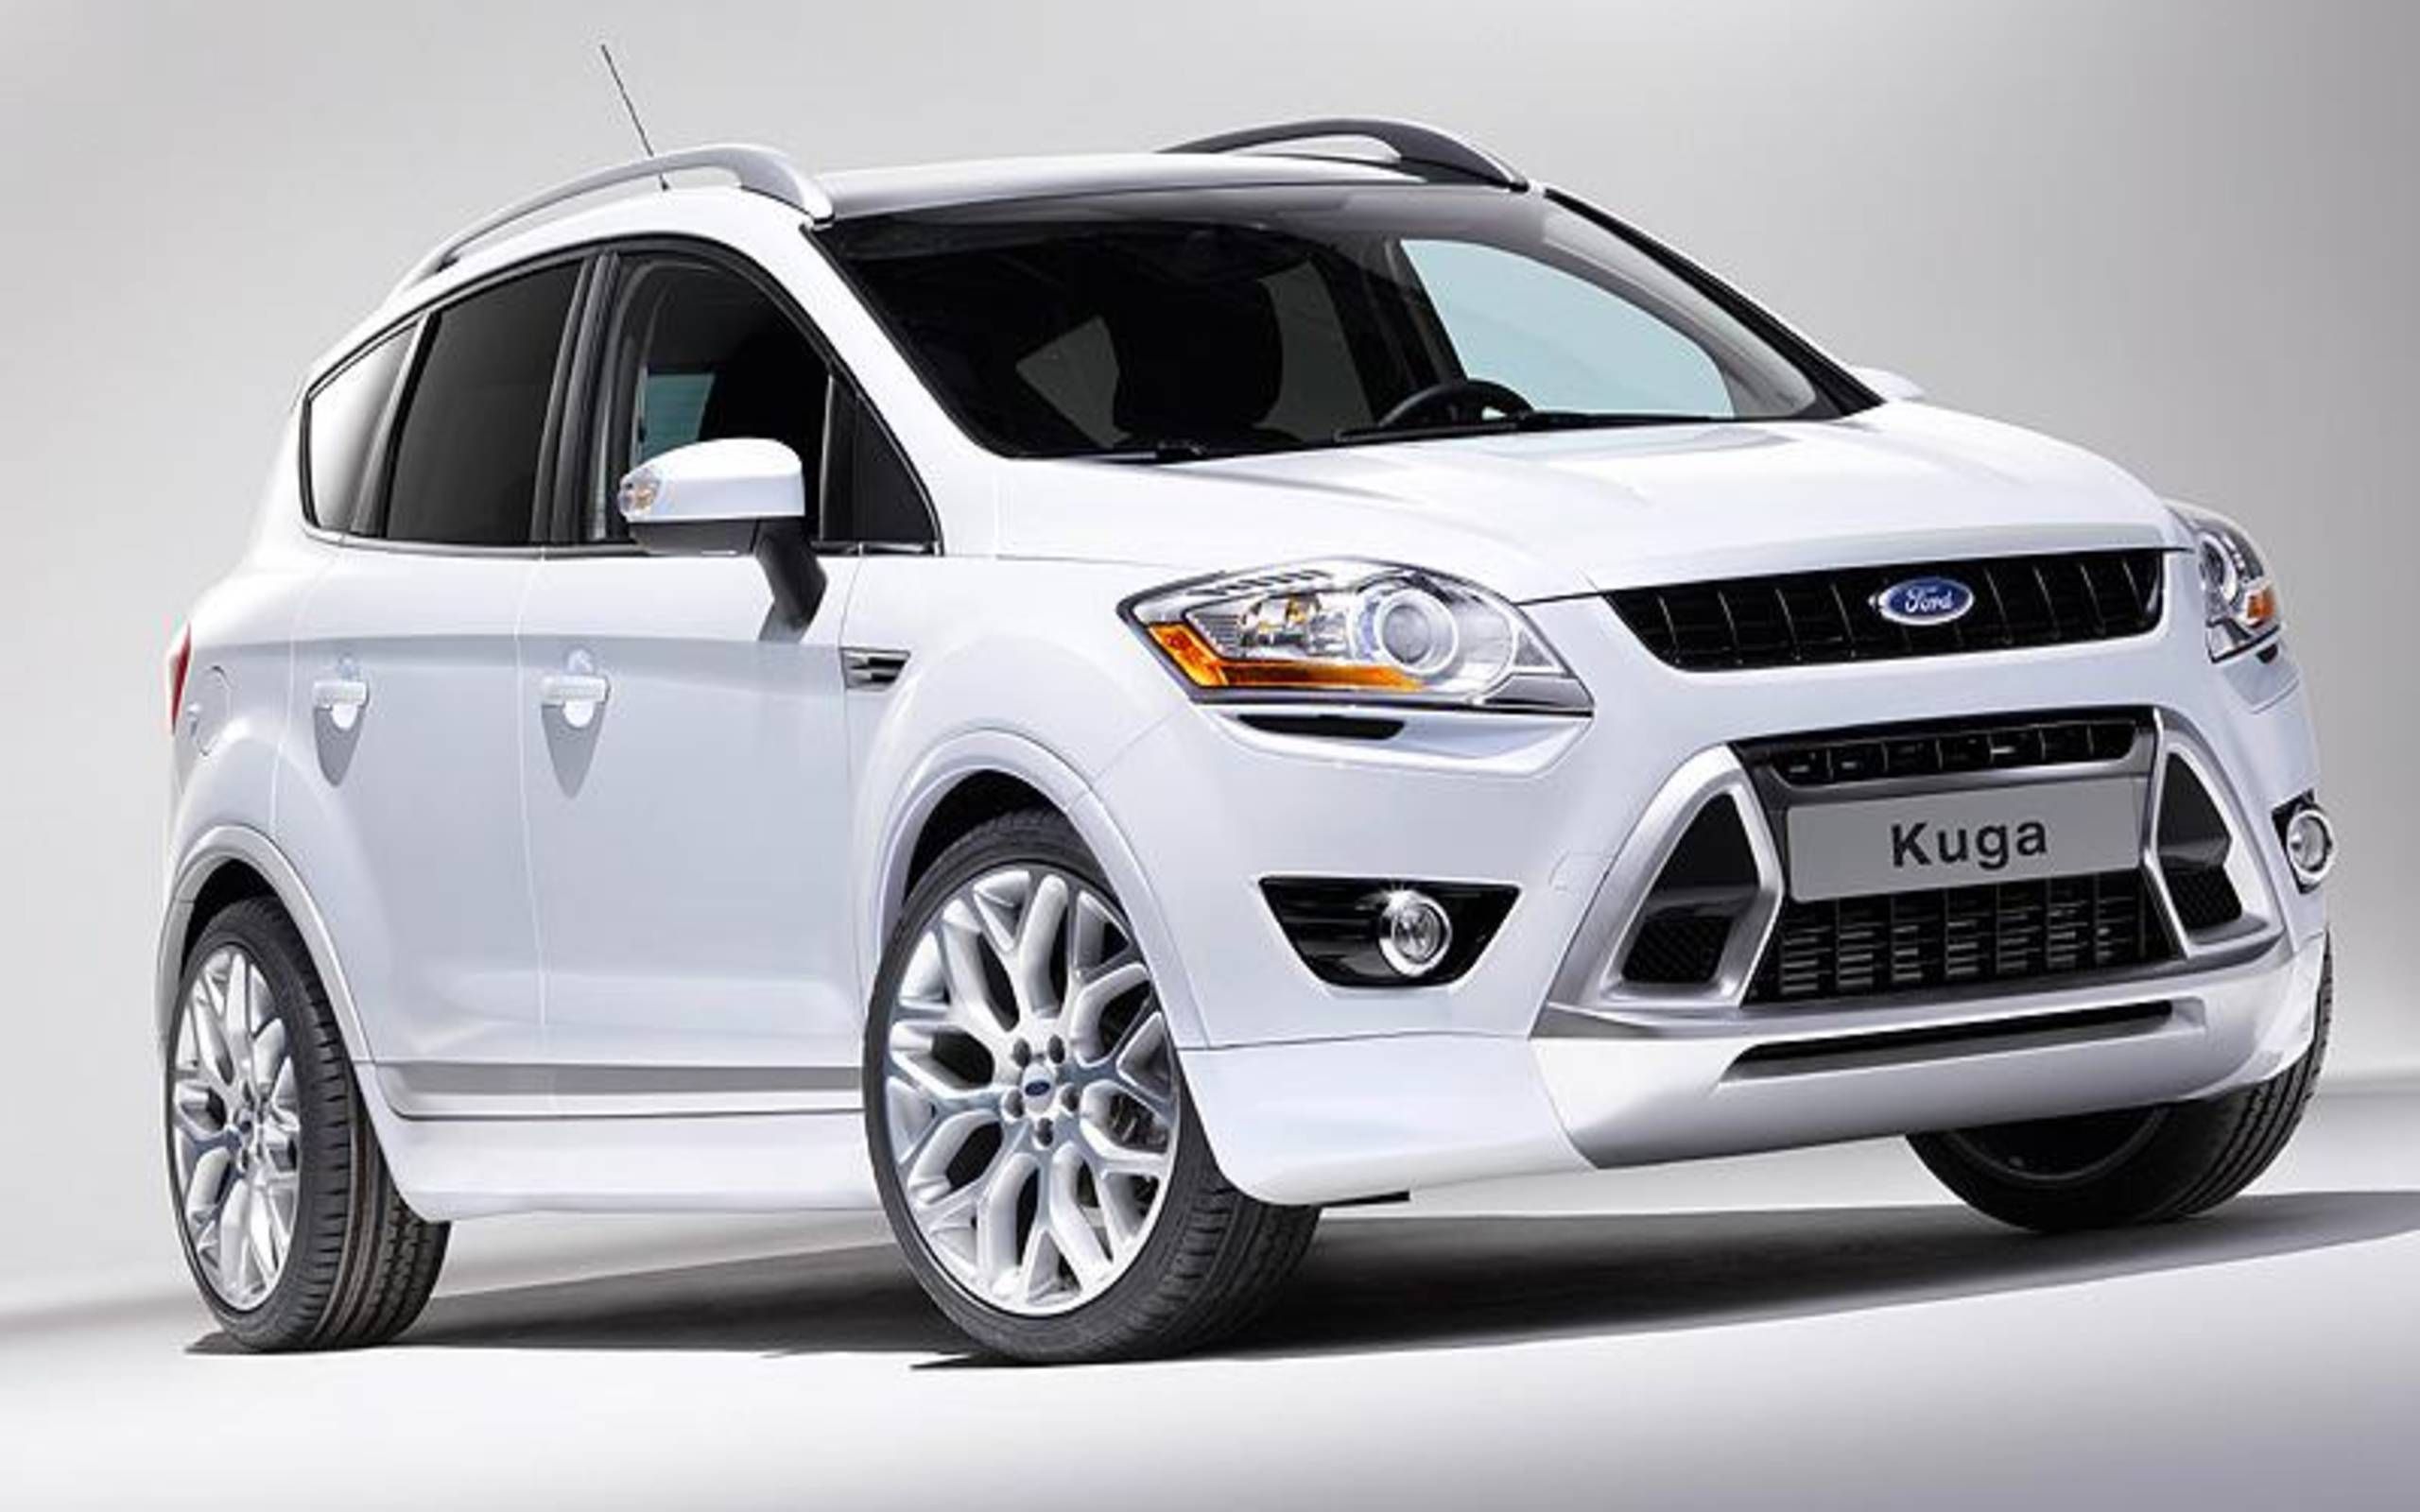 mot Ampère liberaal Styled Kuga: Ford shows crossover with body kit, upgraded interior in Paris